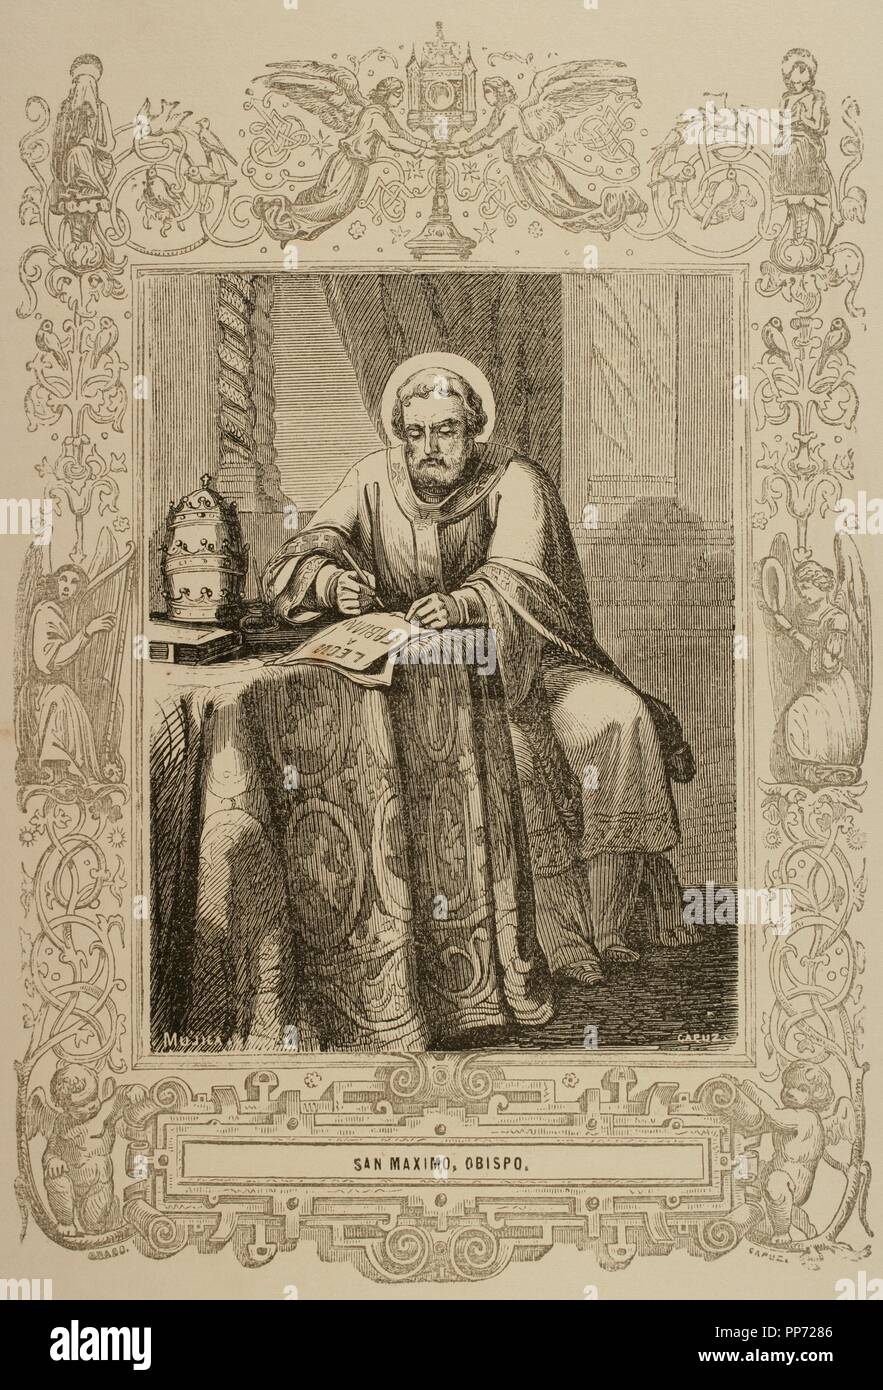 Maximus the Confessor (580-662). Christian monk, theologian, and scholar. Engraving by Capuz, 1853. Stock Photo